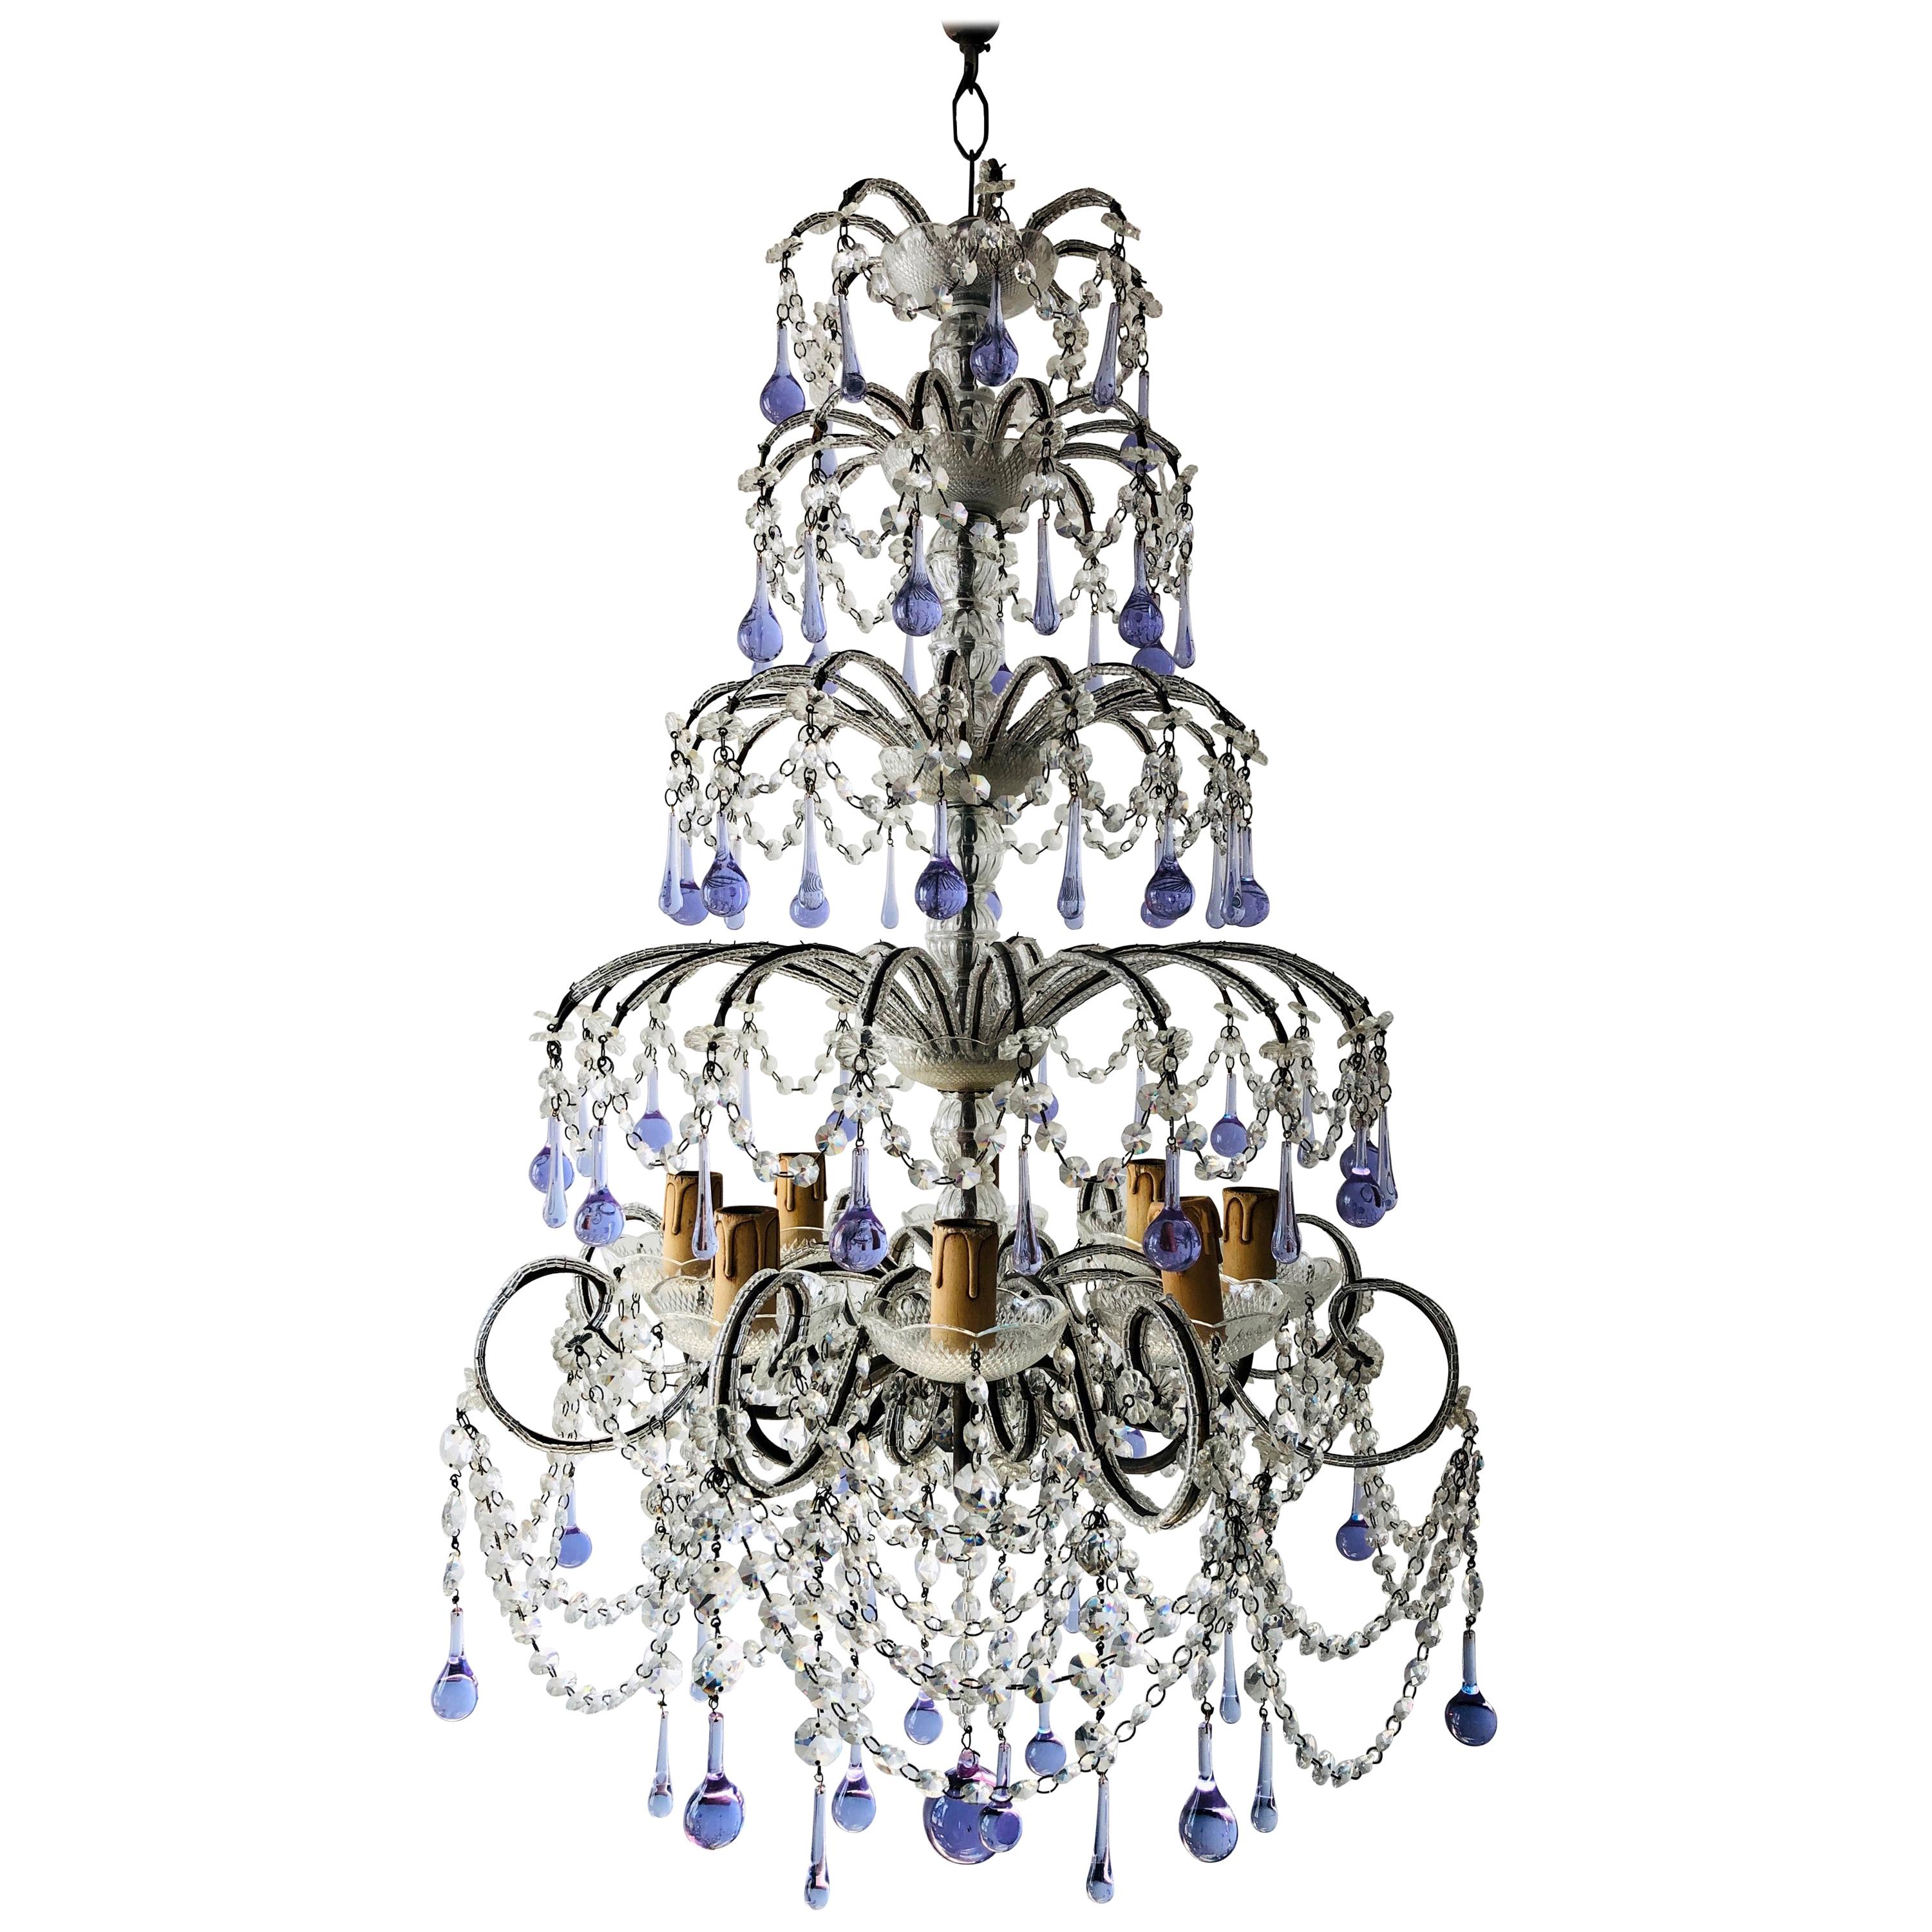 Huge French Murano Lavender Drops and Crystal Swags Chandelier, circa 1920